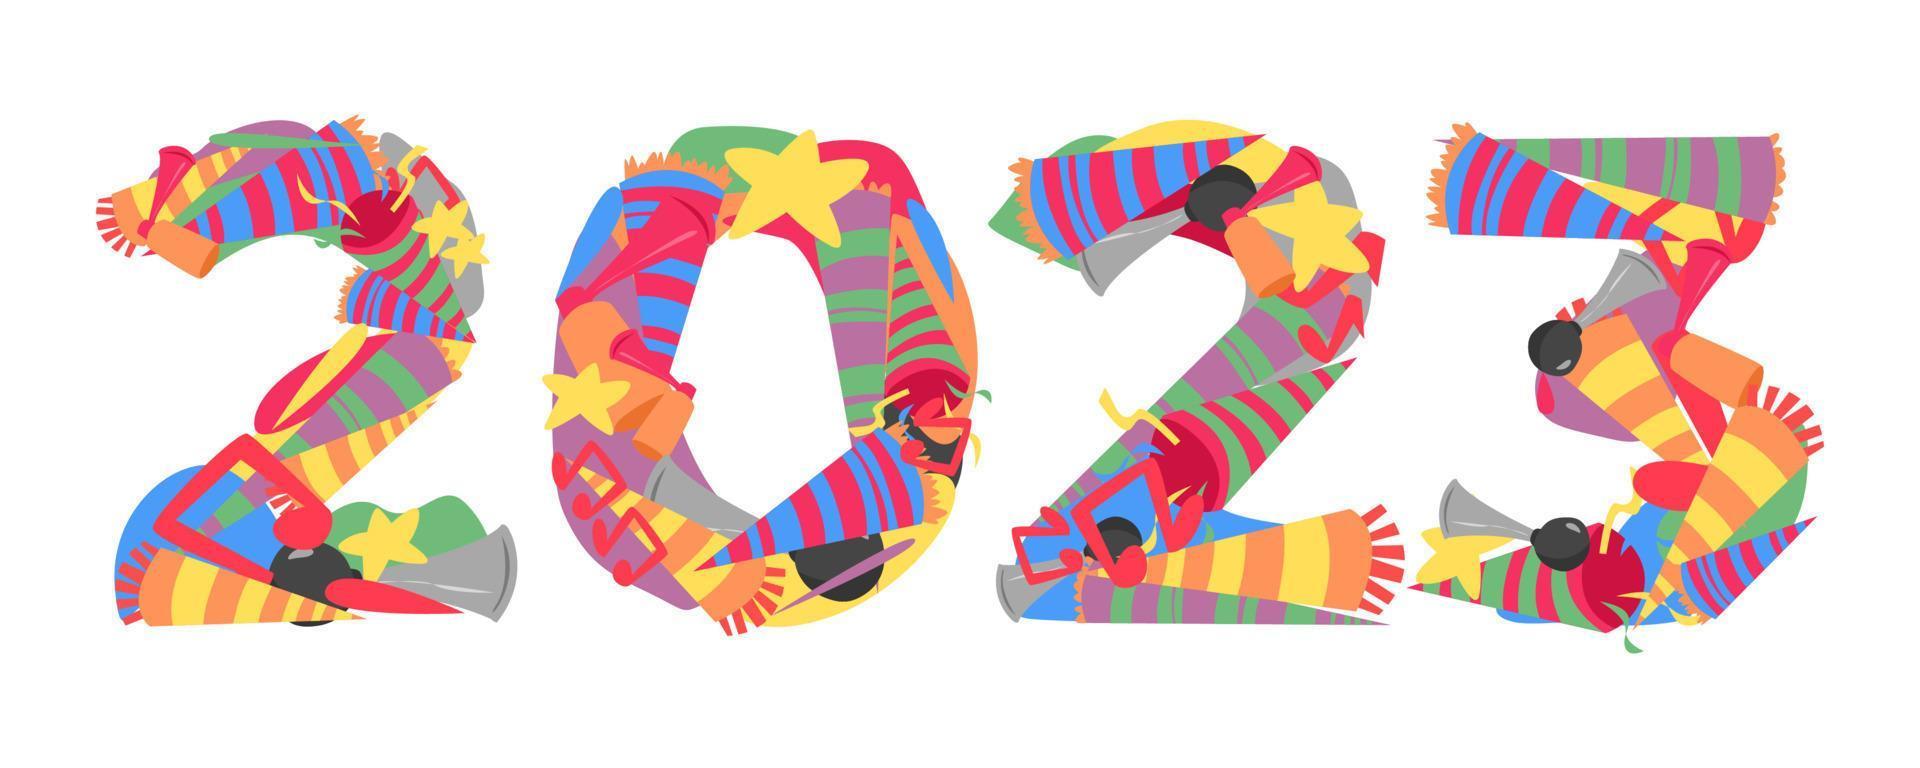 2023 font typography from icon pack of trumpets, horns, etc. doodle collage. new year concept for template, greeting card, print, sticker, etc. vector